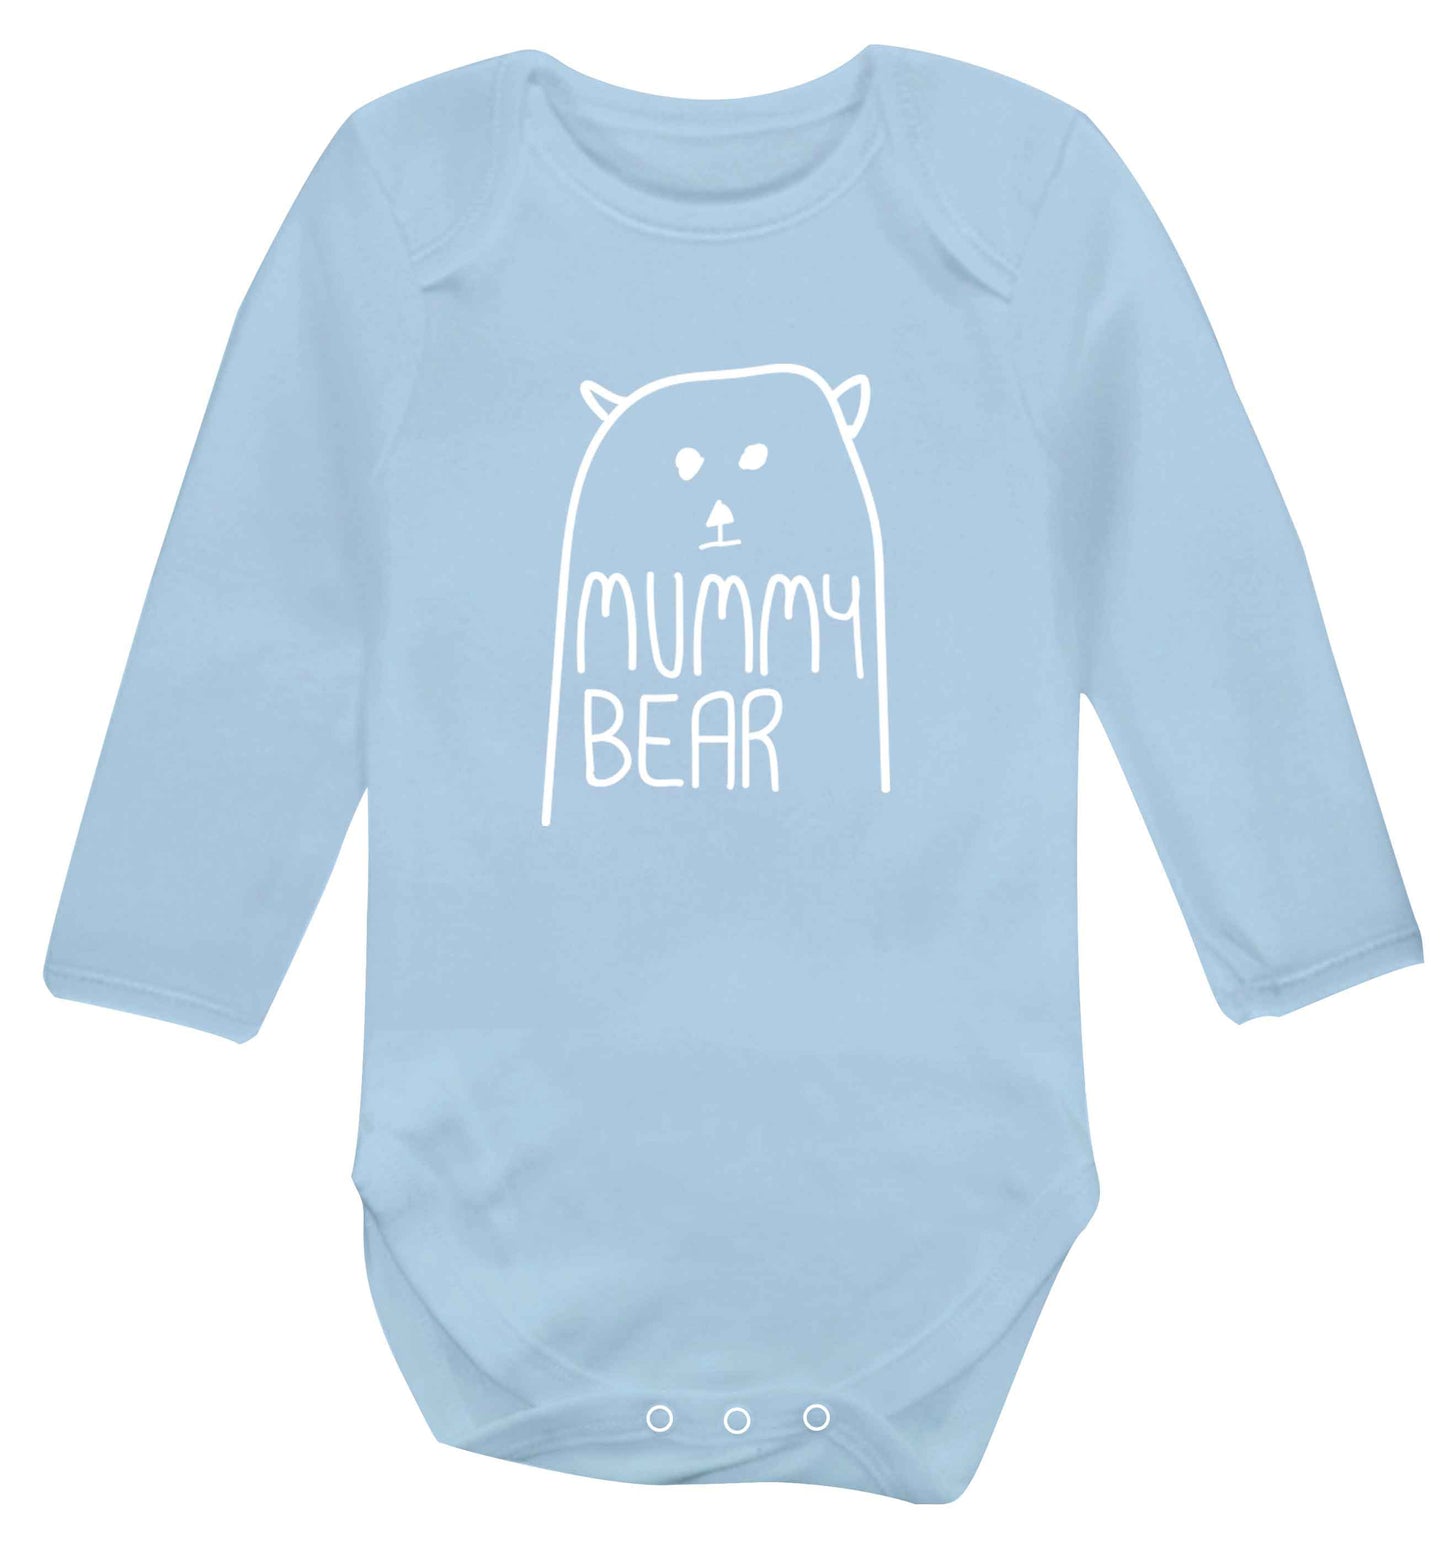 Mummy bear baby vest long sleeved pale blue 6-12 months